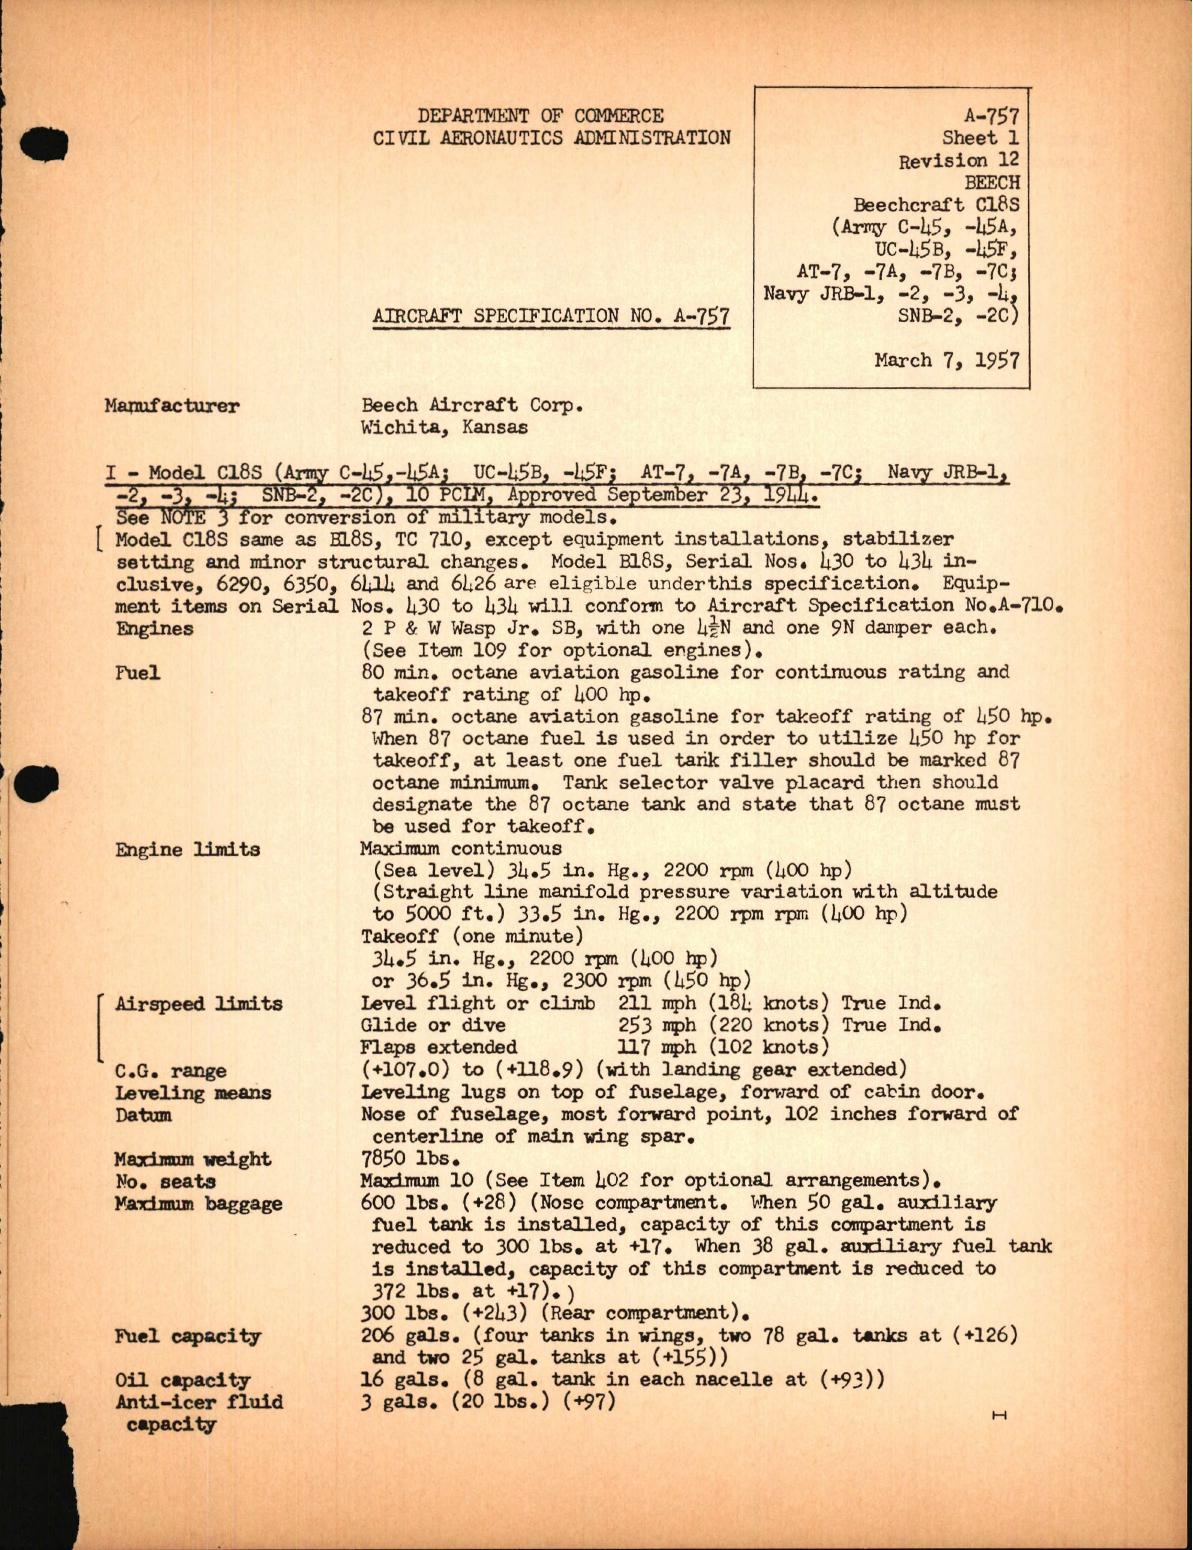 Sample page 1 from AirCorps Library document: C-45, AT-7, JRB & SNB Series